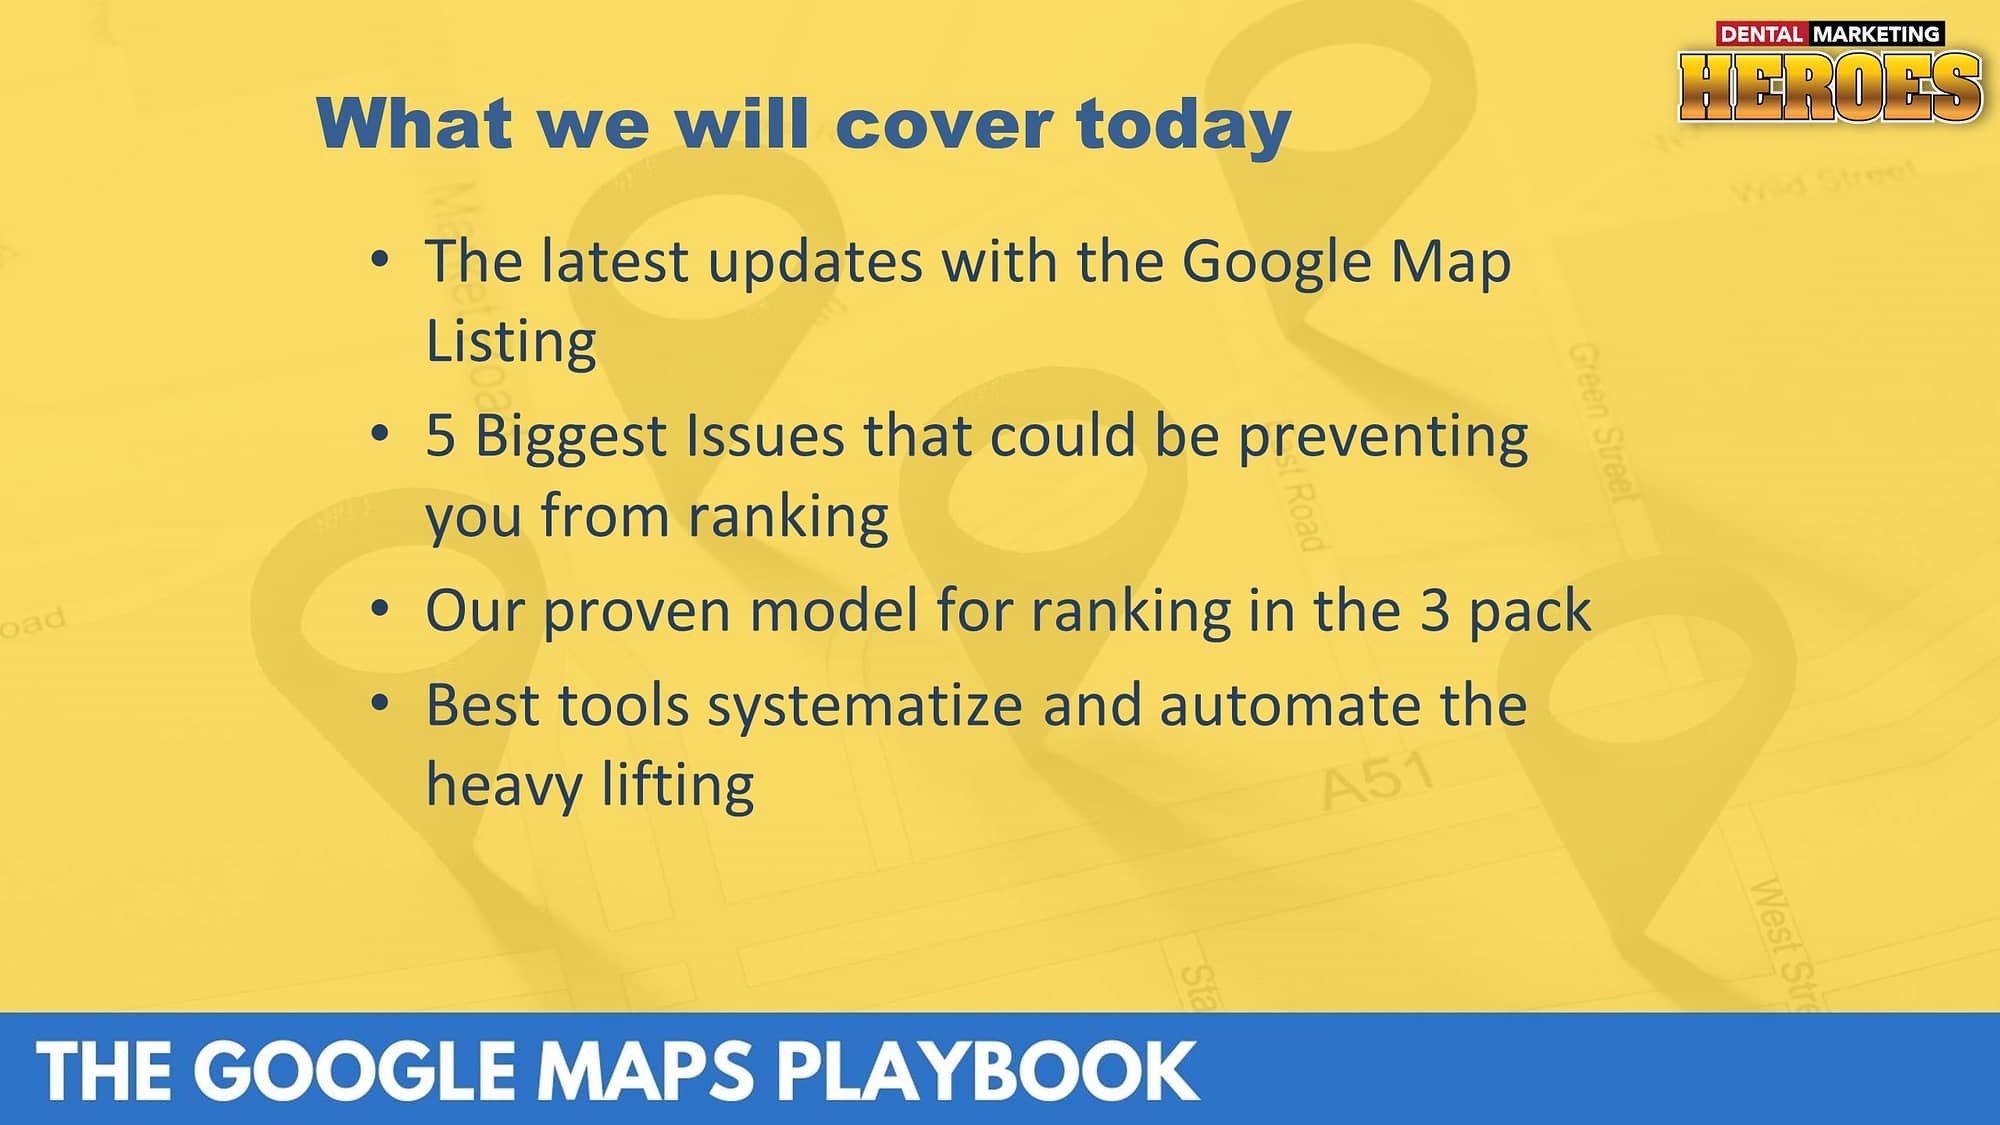 Webinar 6 - Google Maps - What we will cover